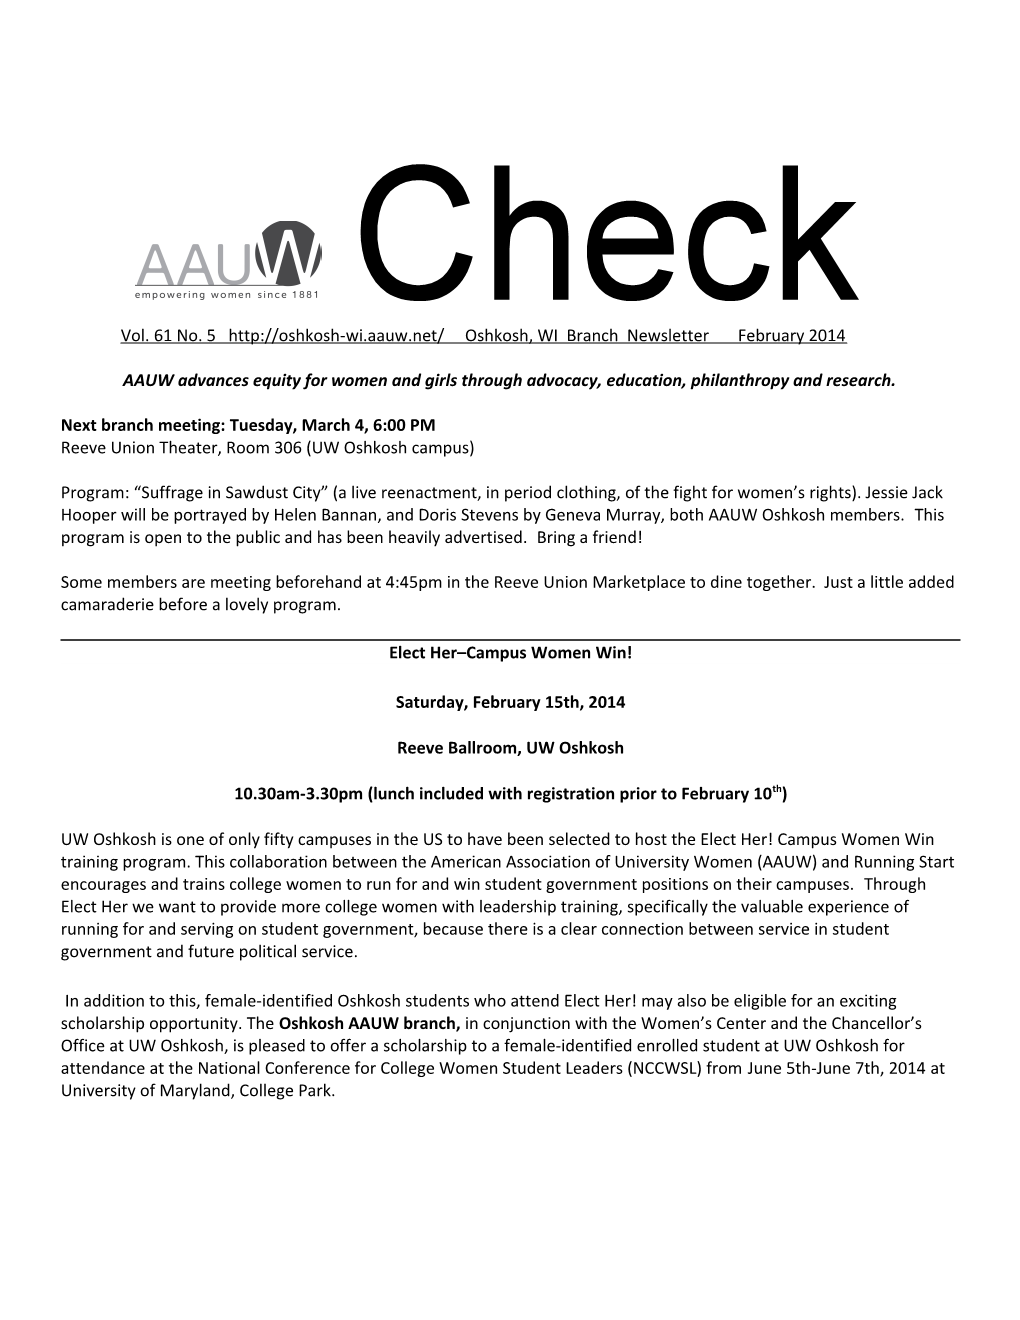 AAUW Advances Equity for Women and Girls Through Advocacy, Education, Philanthropy And